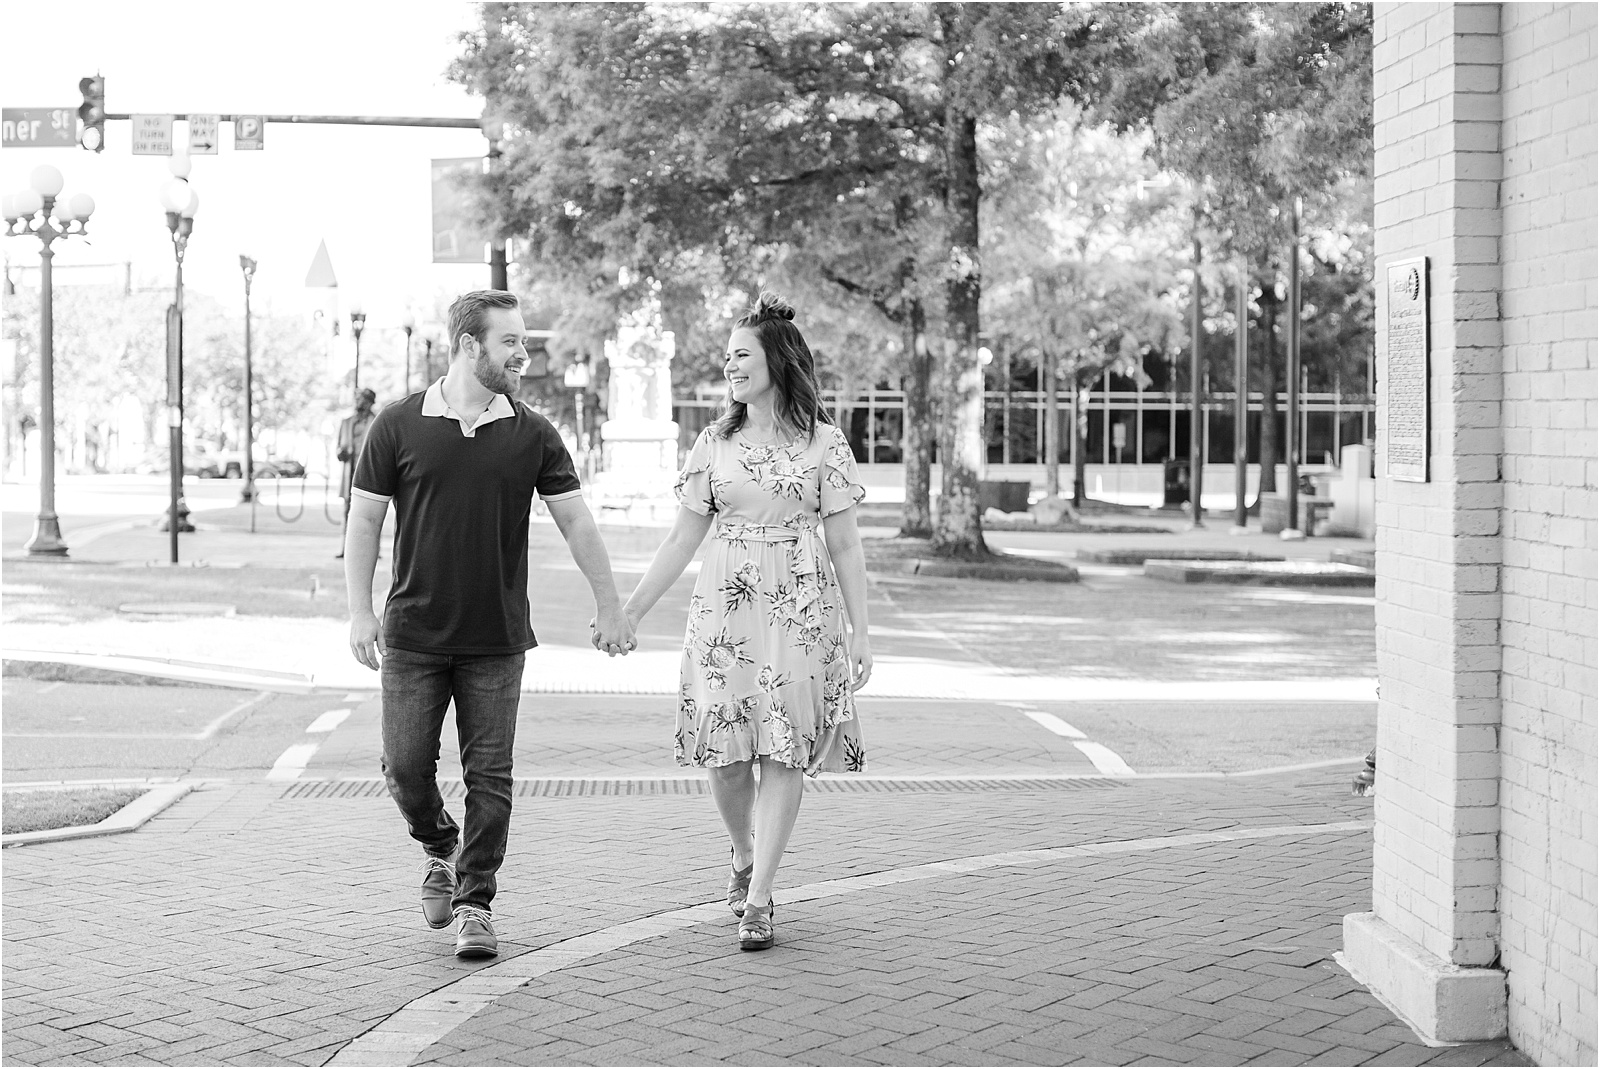 Anderosn SC couple walking in downtown holding hands